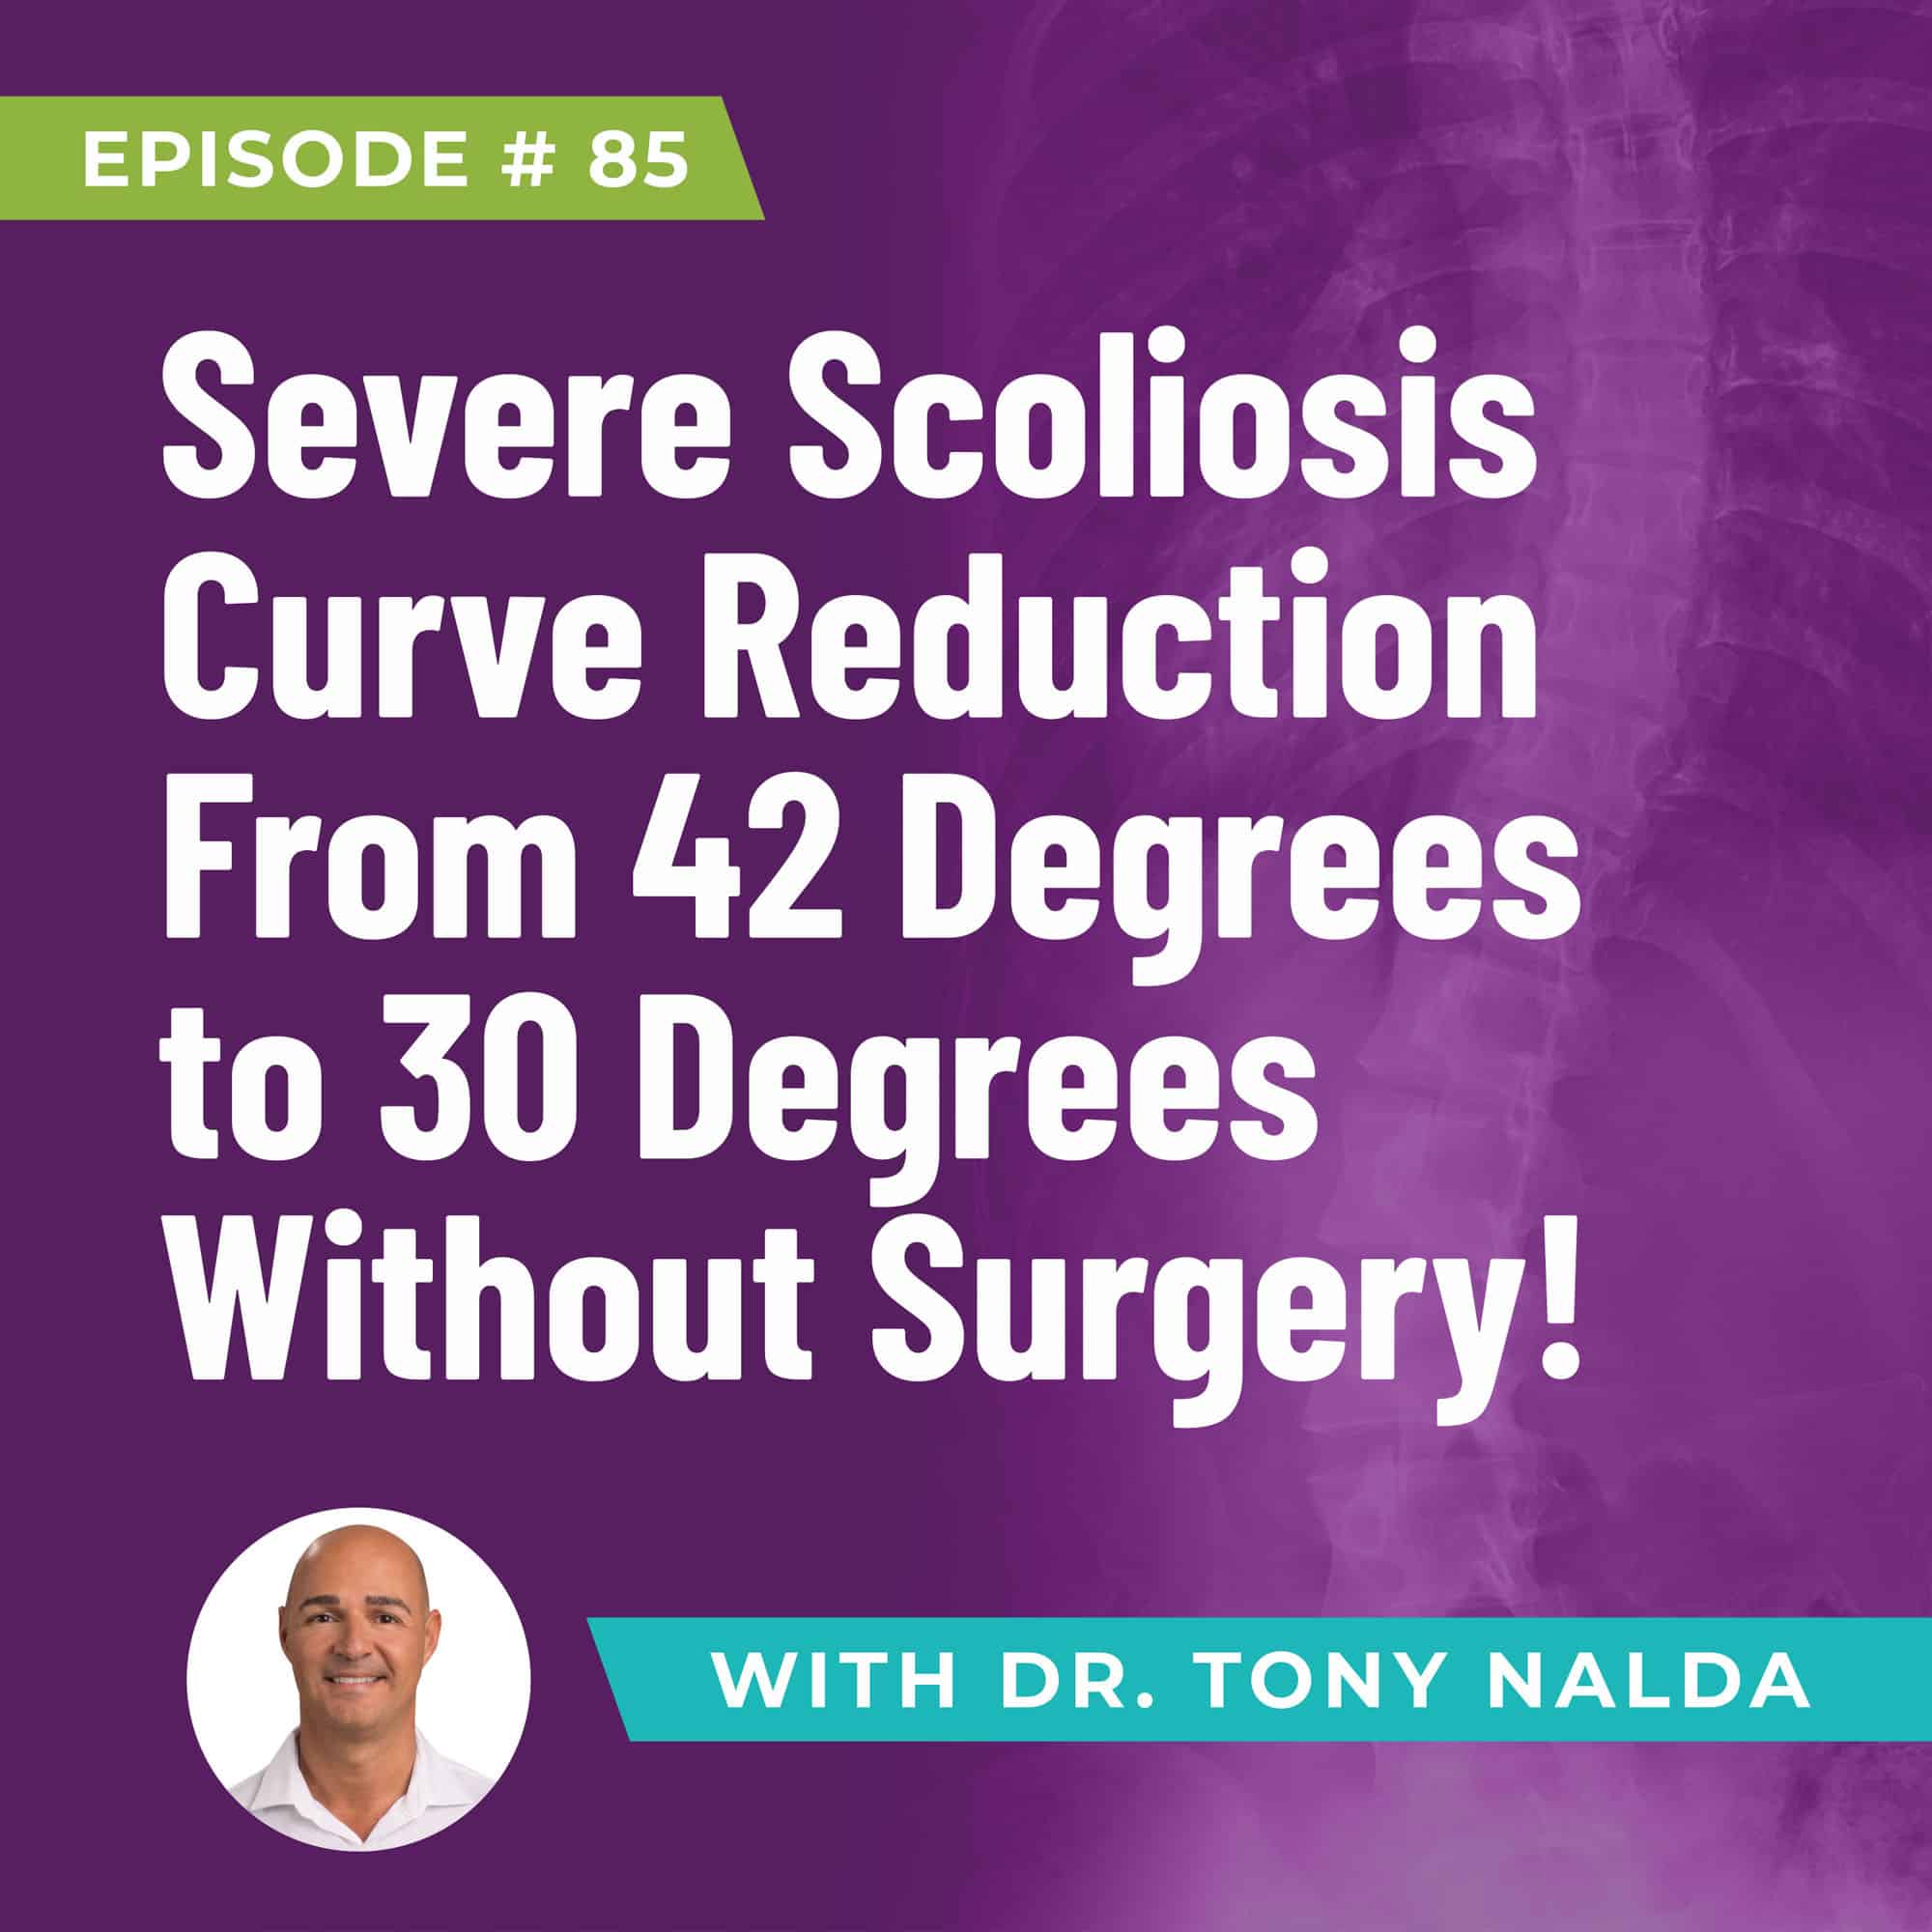 Severe Scoliosis Curve Reduction From 42 Degrees to 30 Degrees Without Surgery!